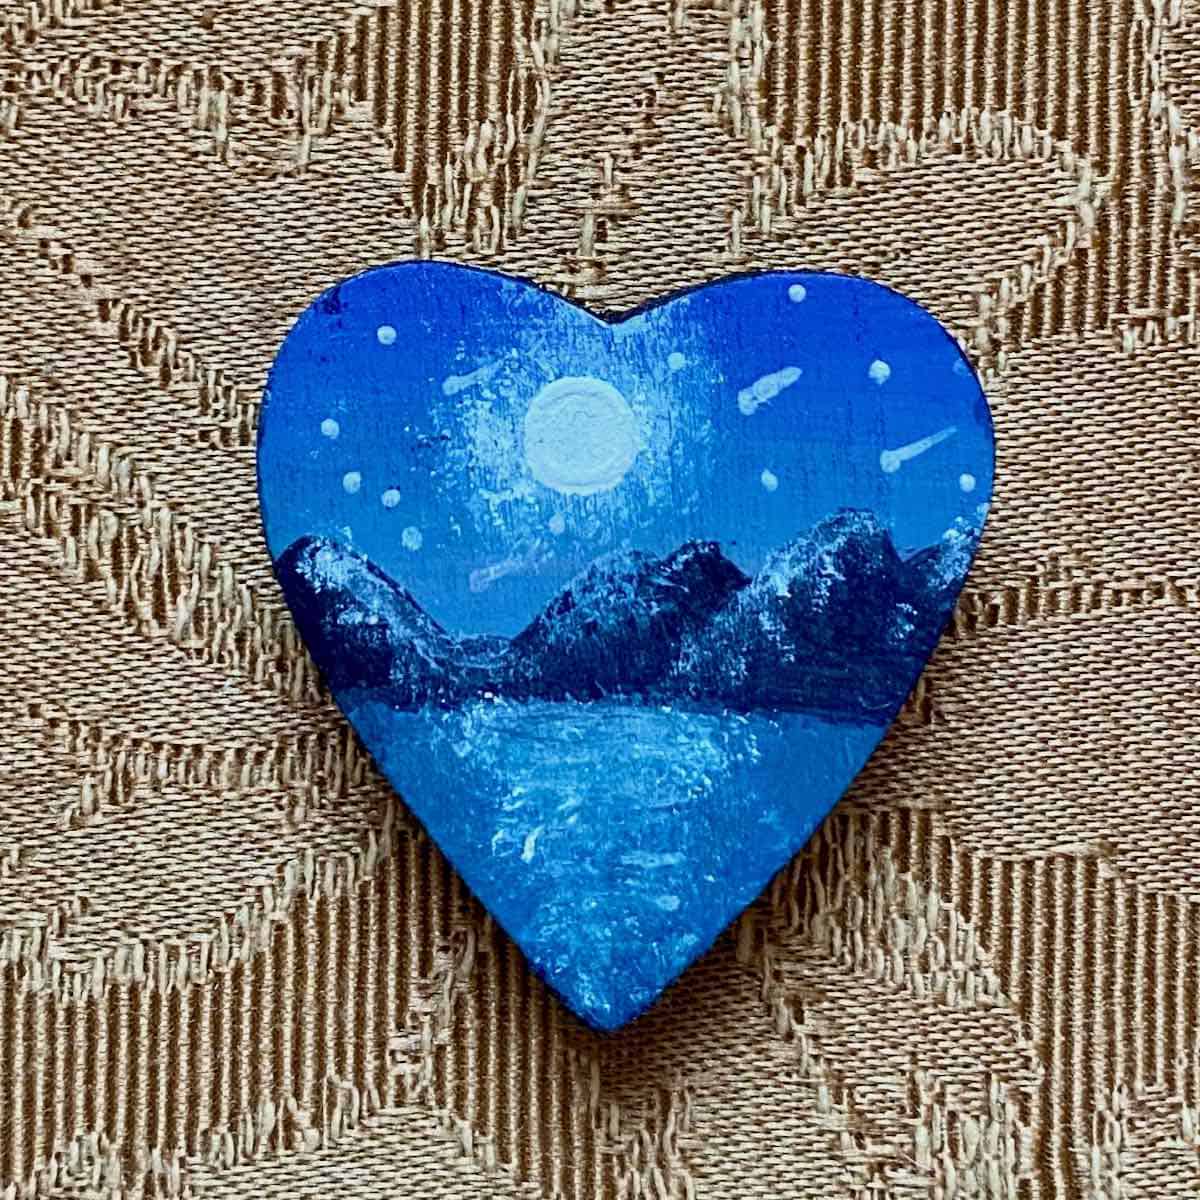 Painted blue heart for a lovely grief poem.